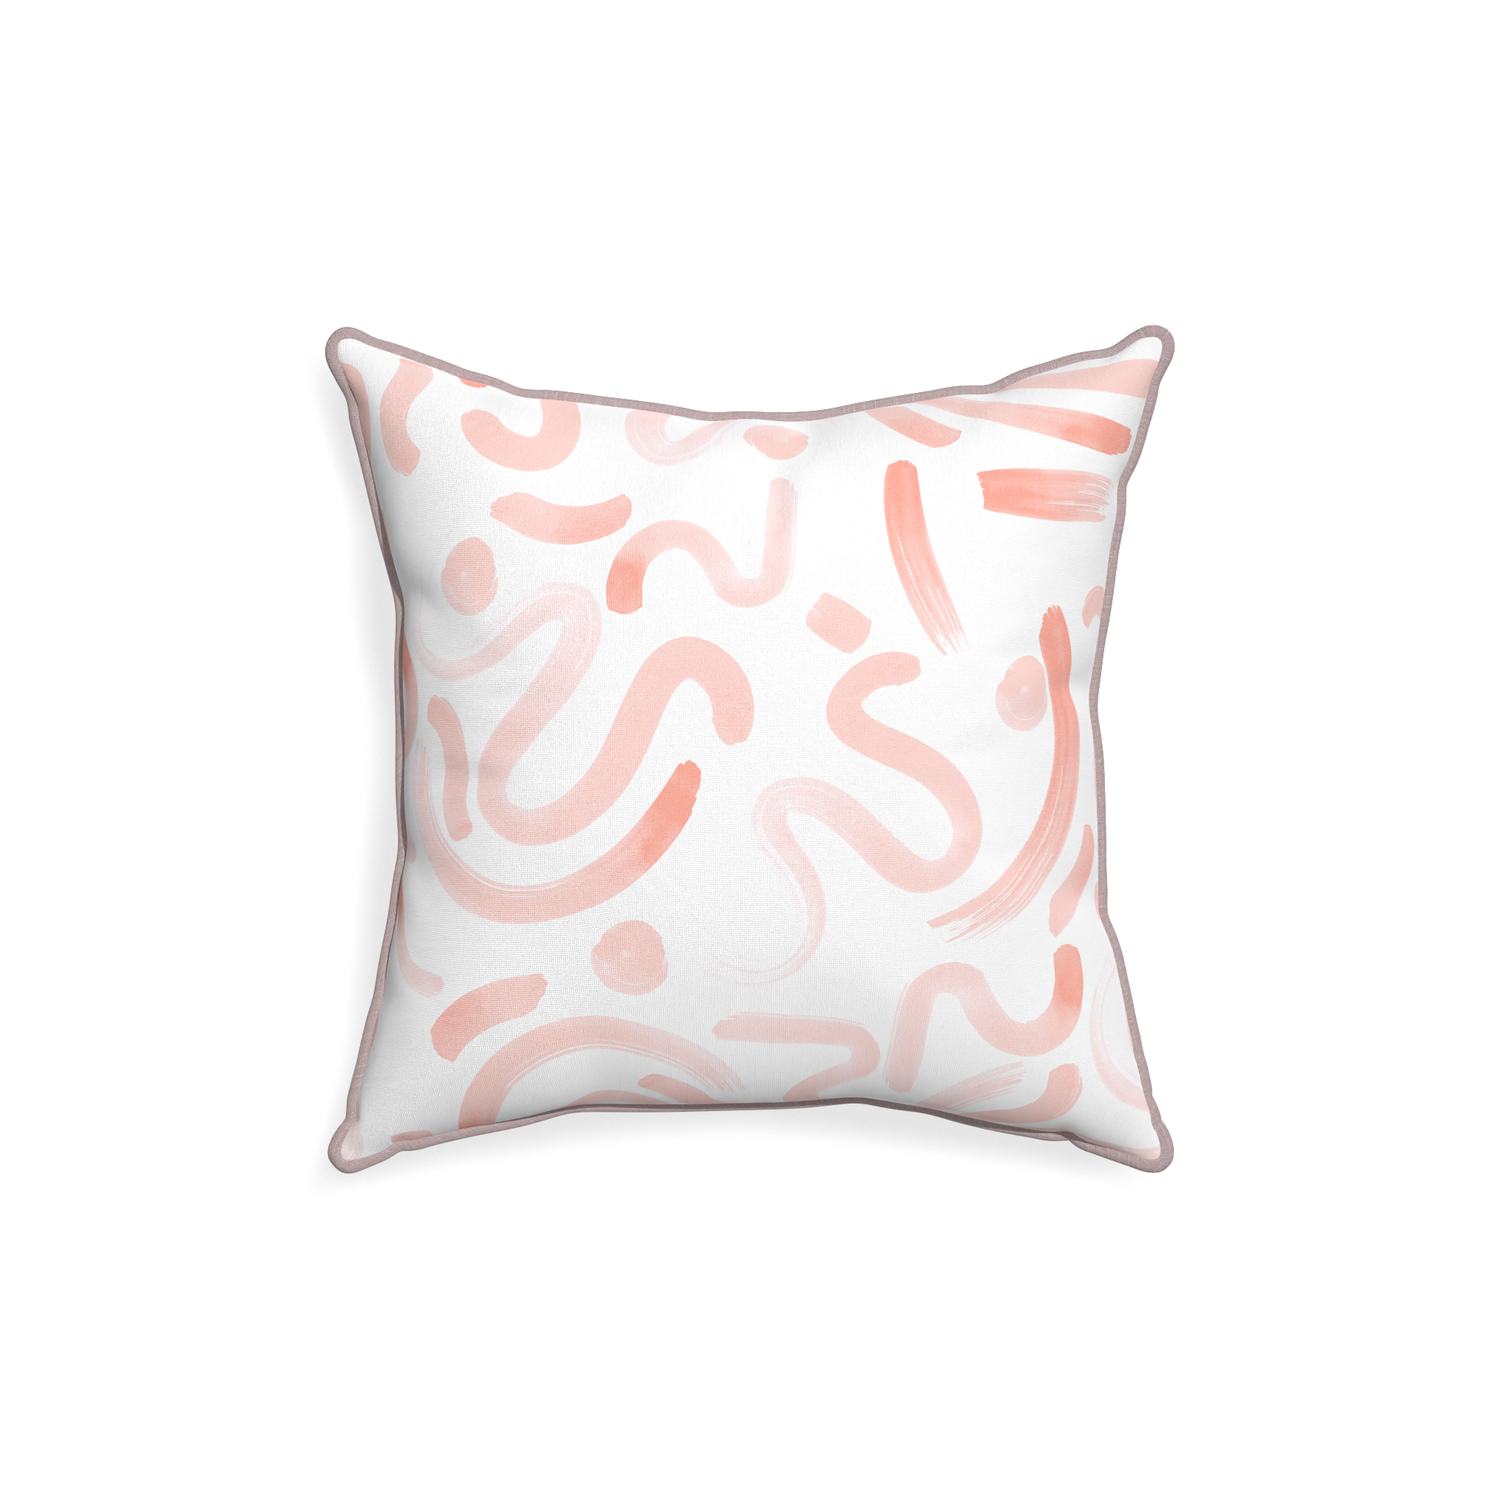 18-square hockney pink custom pink graphicpillow with orchid piping on white background